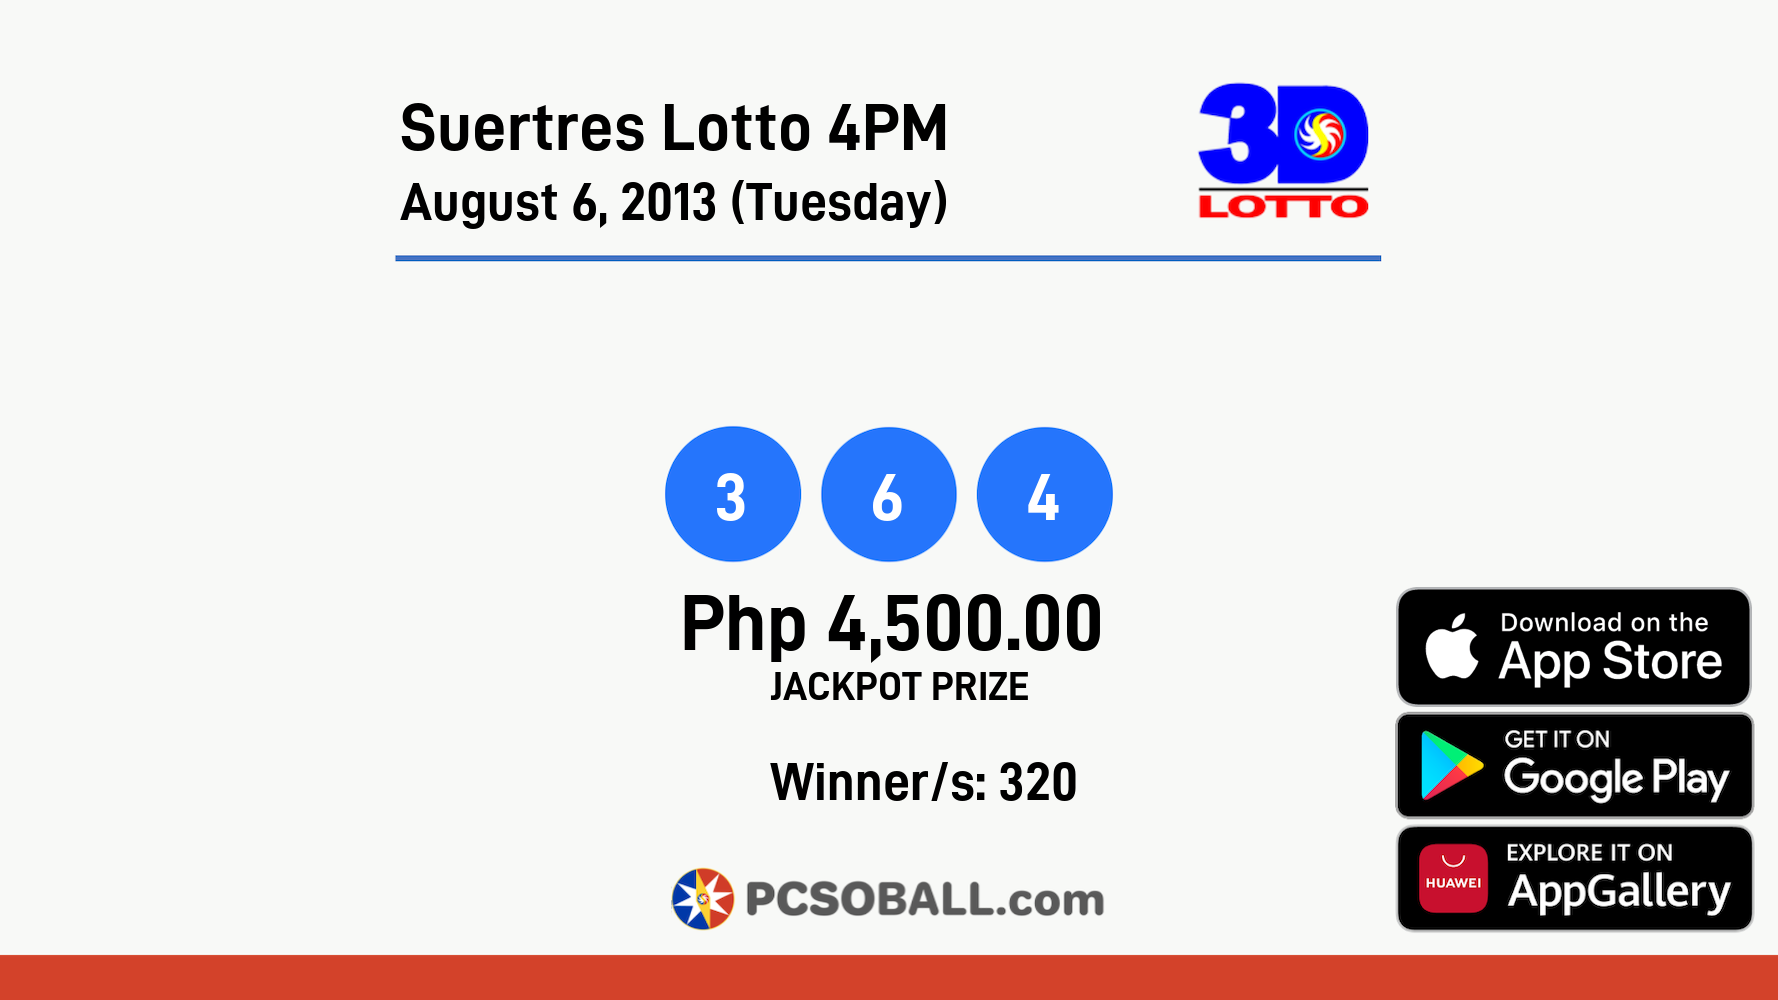 Suertres Lotto 4PM August 6, 2013 (Tuesday) Result